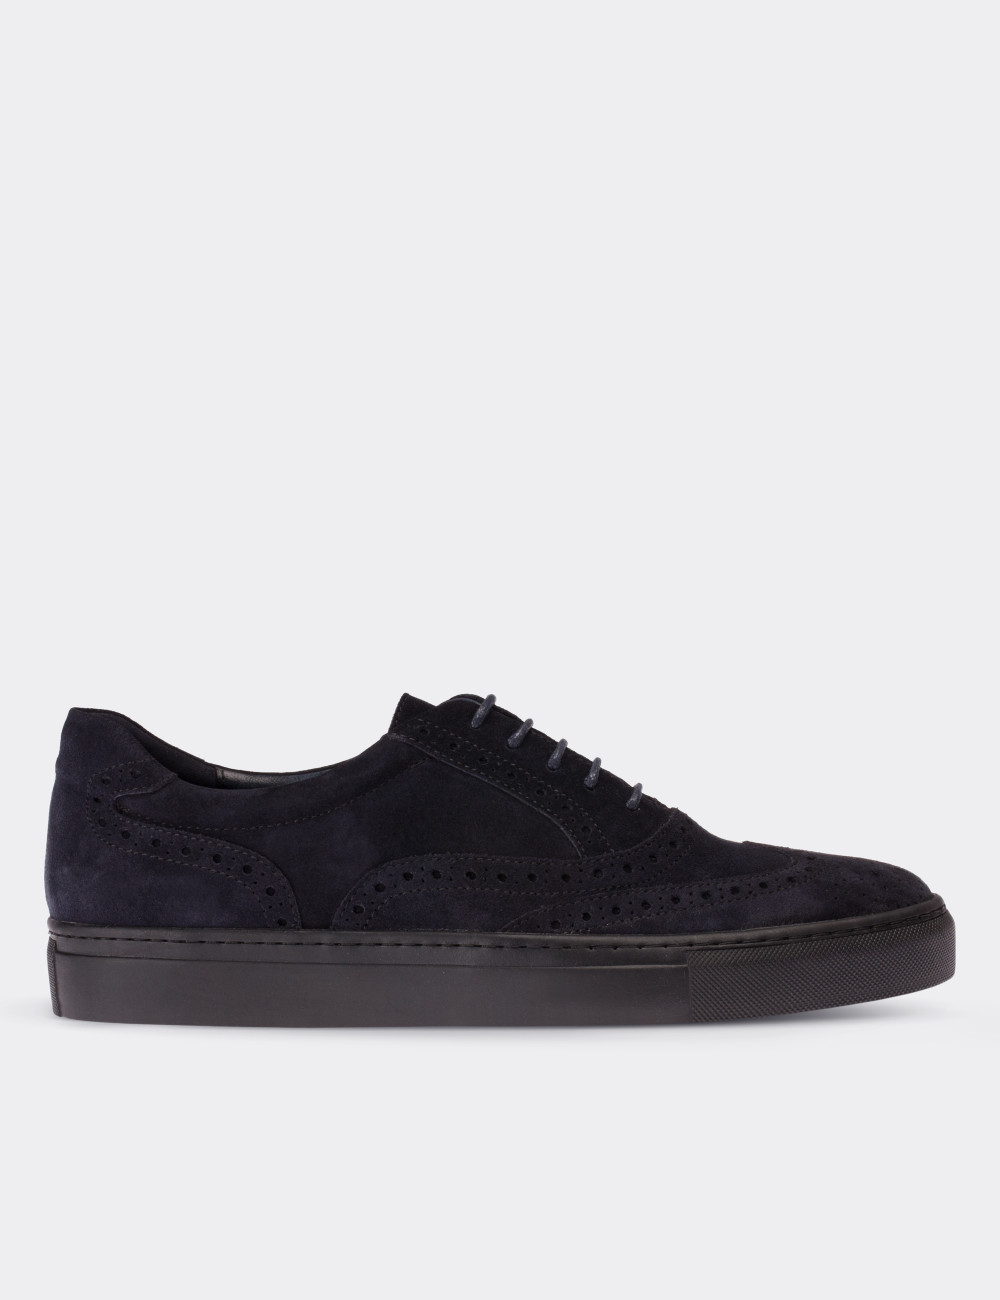 Navy Suede Leather  Sneakers - 01637MLCVC03